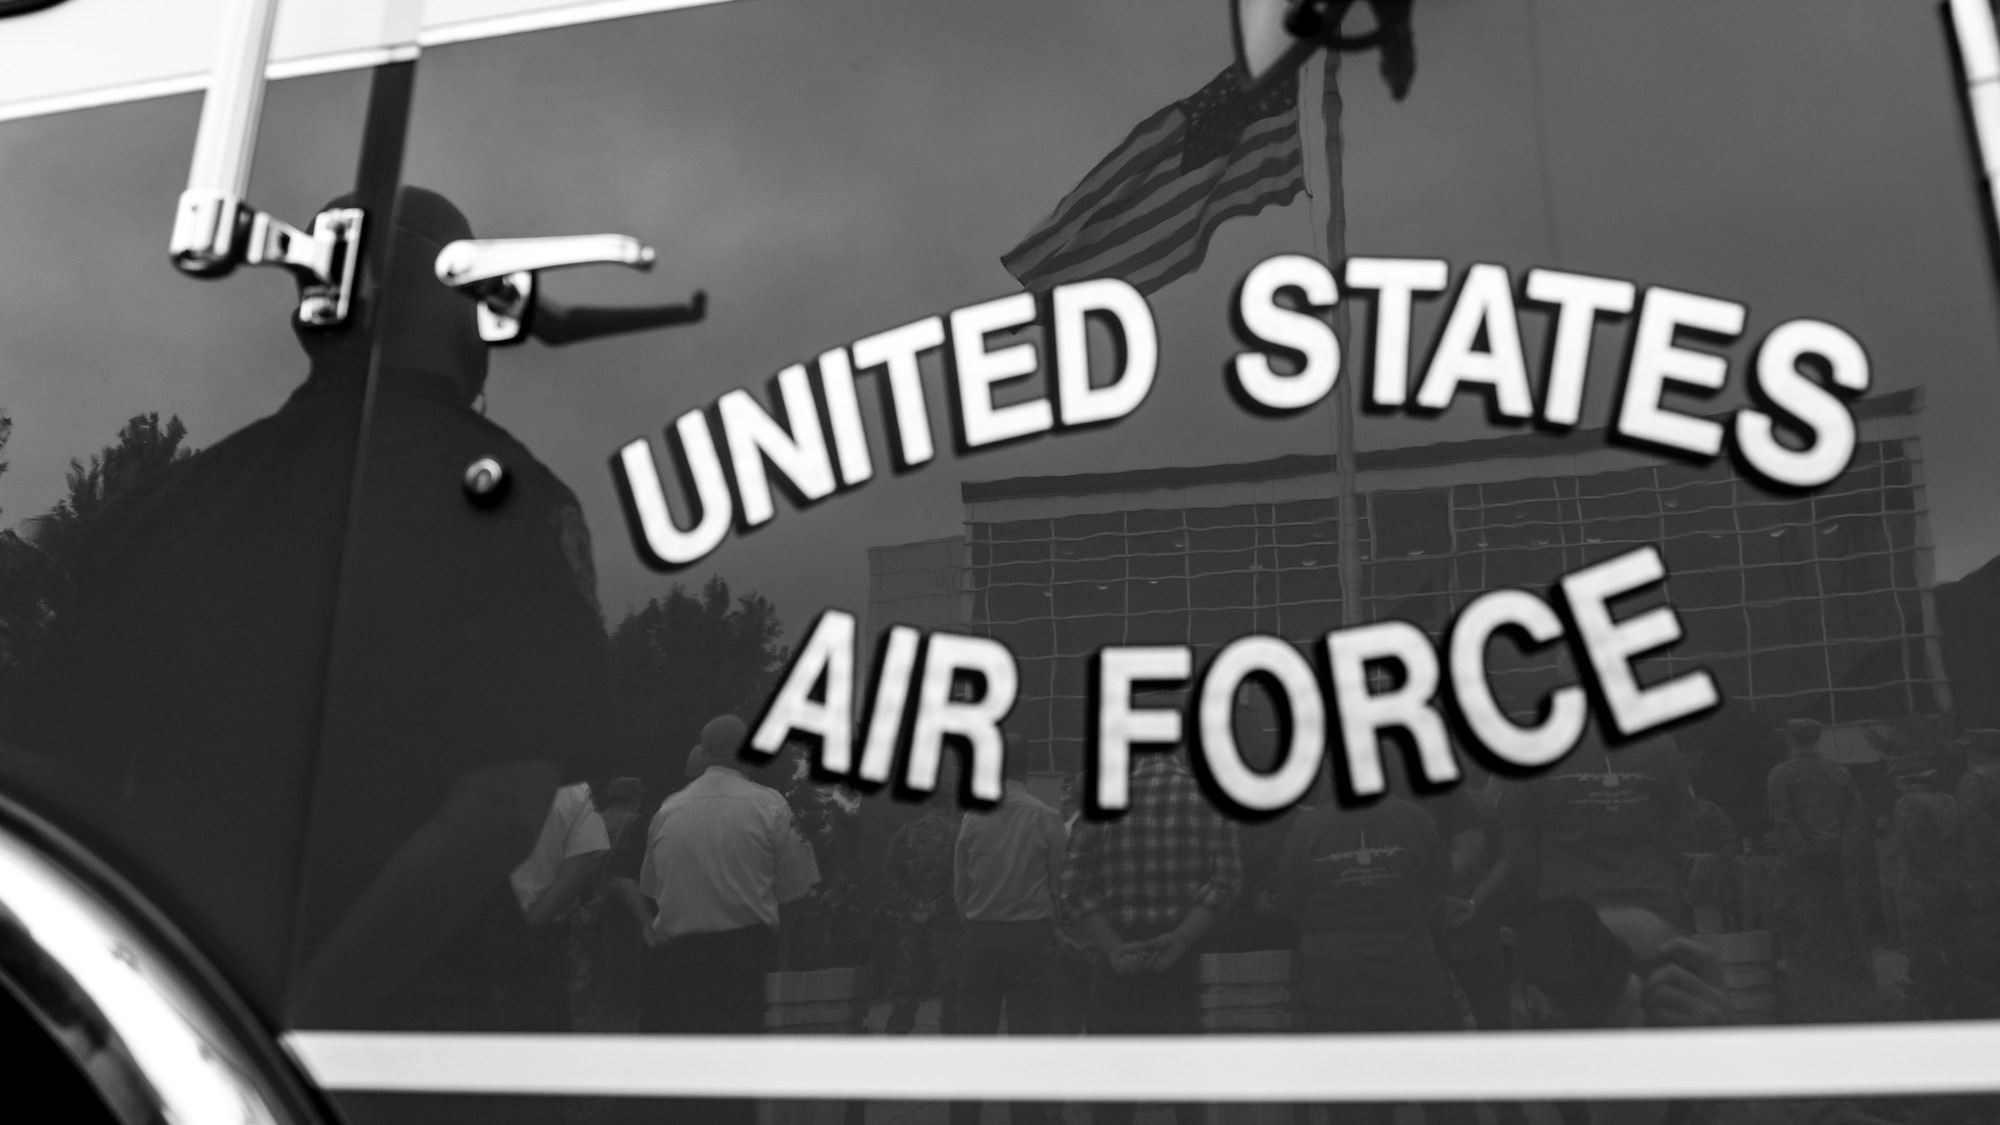 Reserve Citizen Airmen of the 910th Airlift Wing attend Youngstown Air Reserve Station’s 9/11 remembrance ceremony, Sept. 11, 2020. The installation has held a ceremony every year to honor those who lost their lives in the terrorist attacks on Sept. 11, 2001.